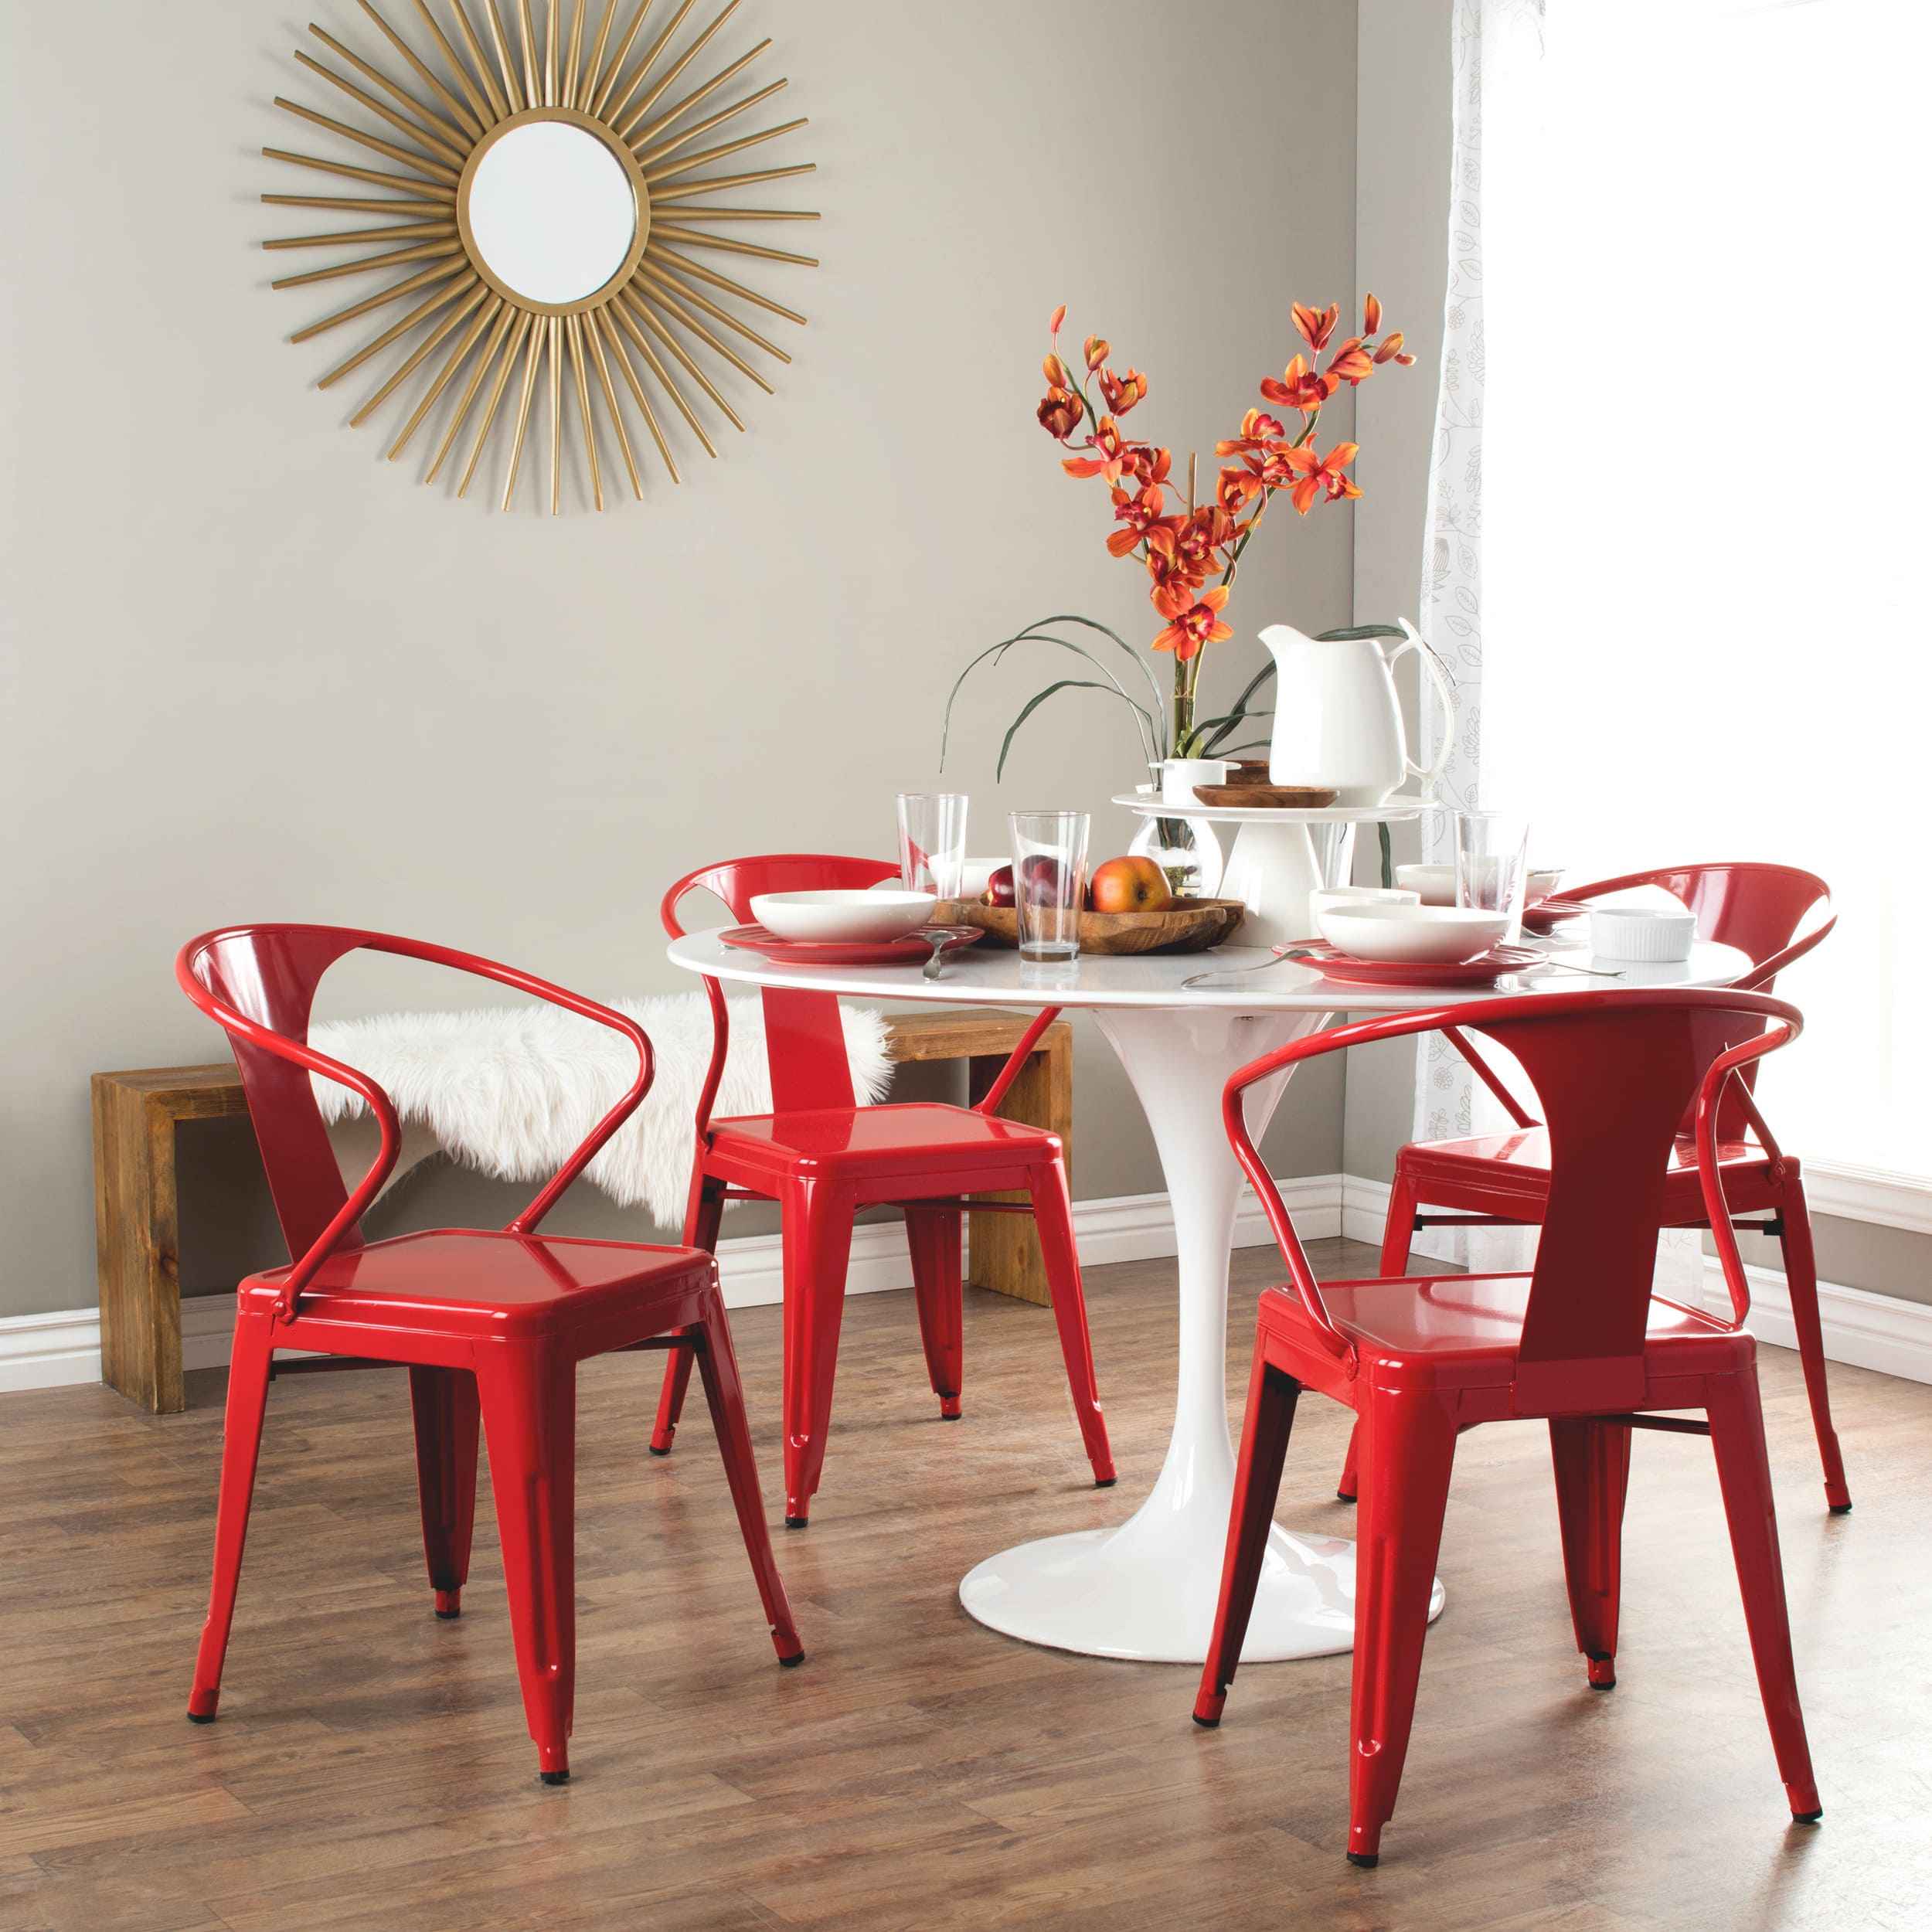 Buy Kitchen & Dining Room Chairs Online at Overstock | Our Best Dining Room & Bar Furniture Deals